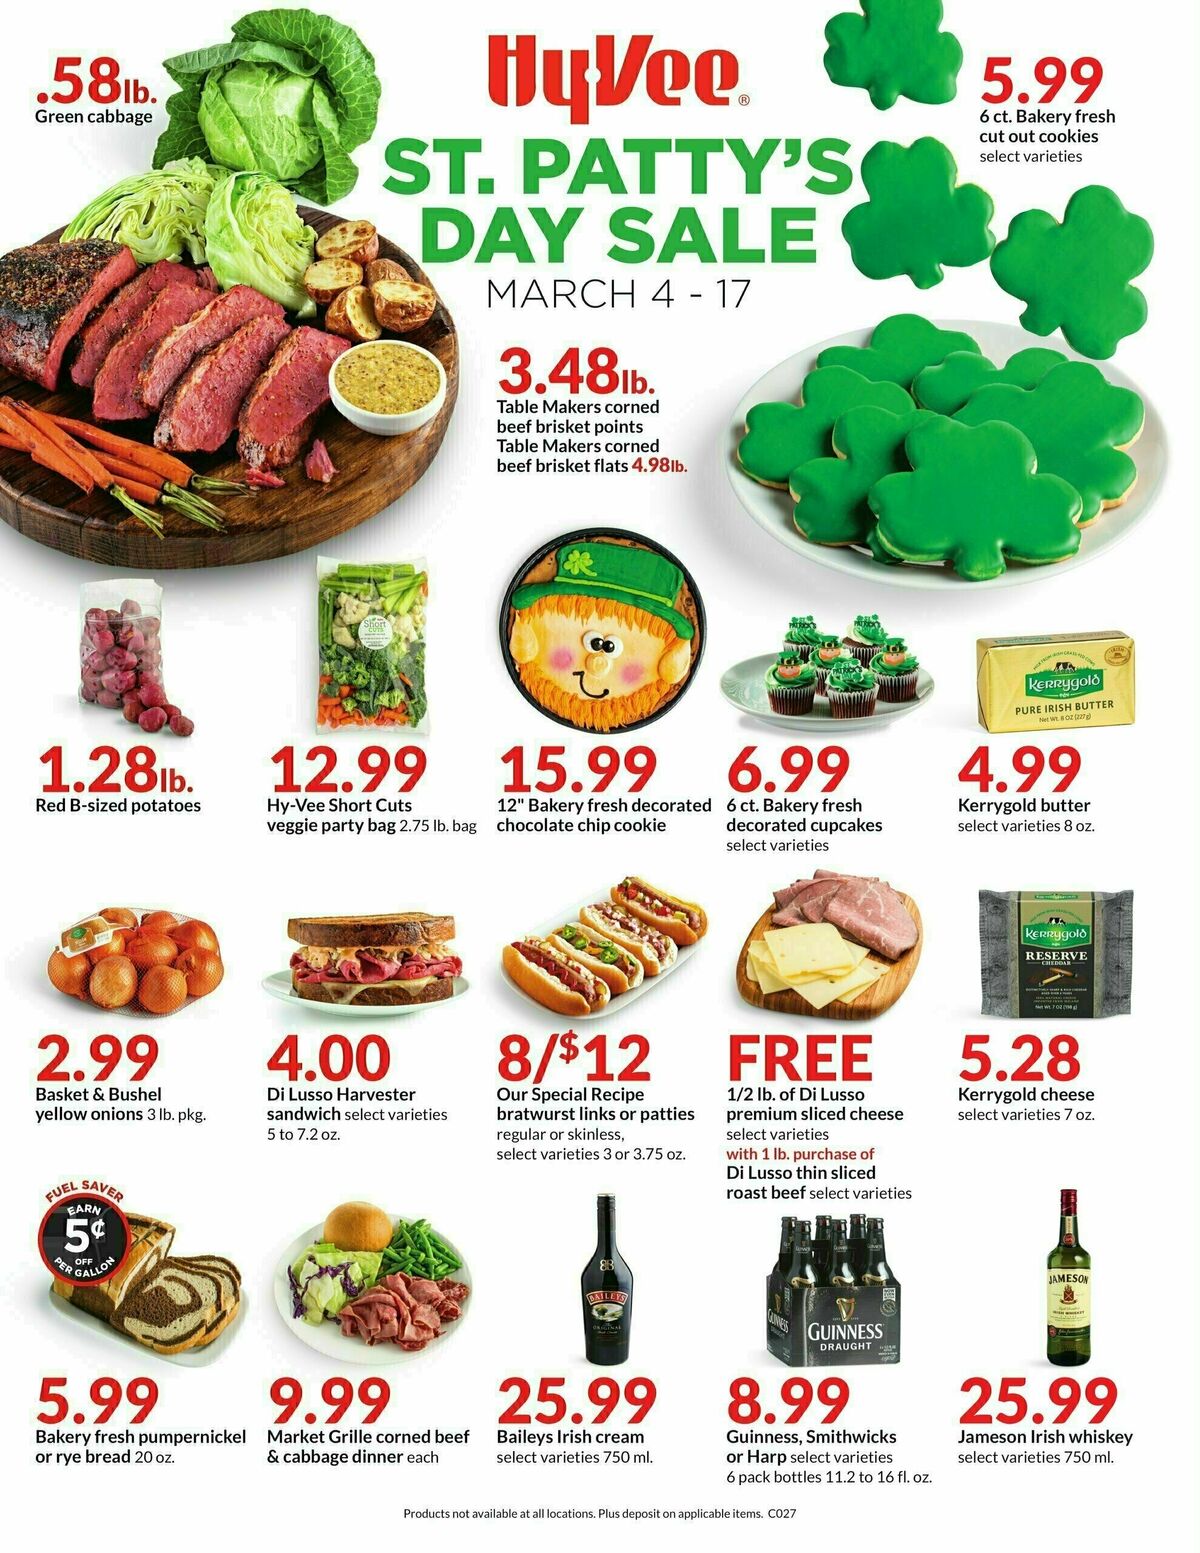 Hy-Vee St. Patty's Day Weekly Ad from March 4